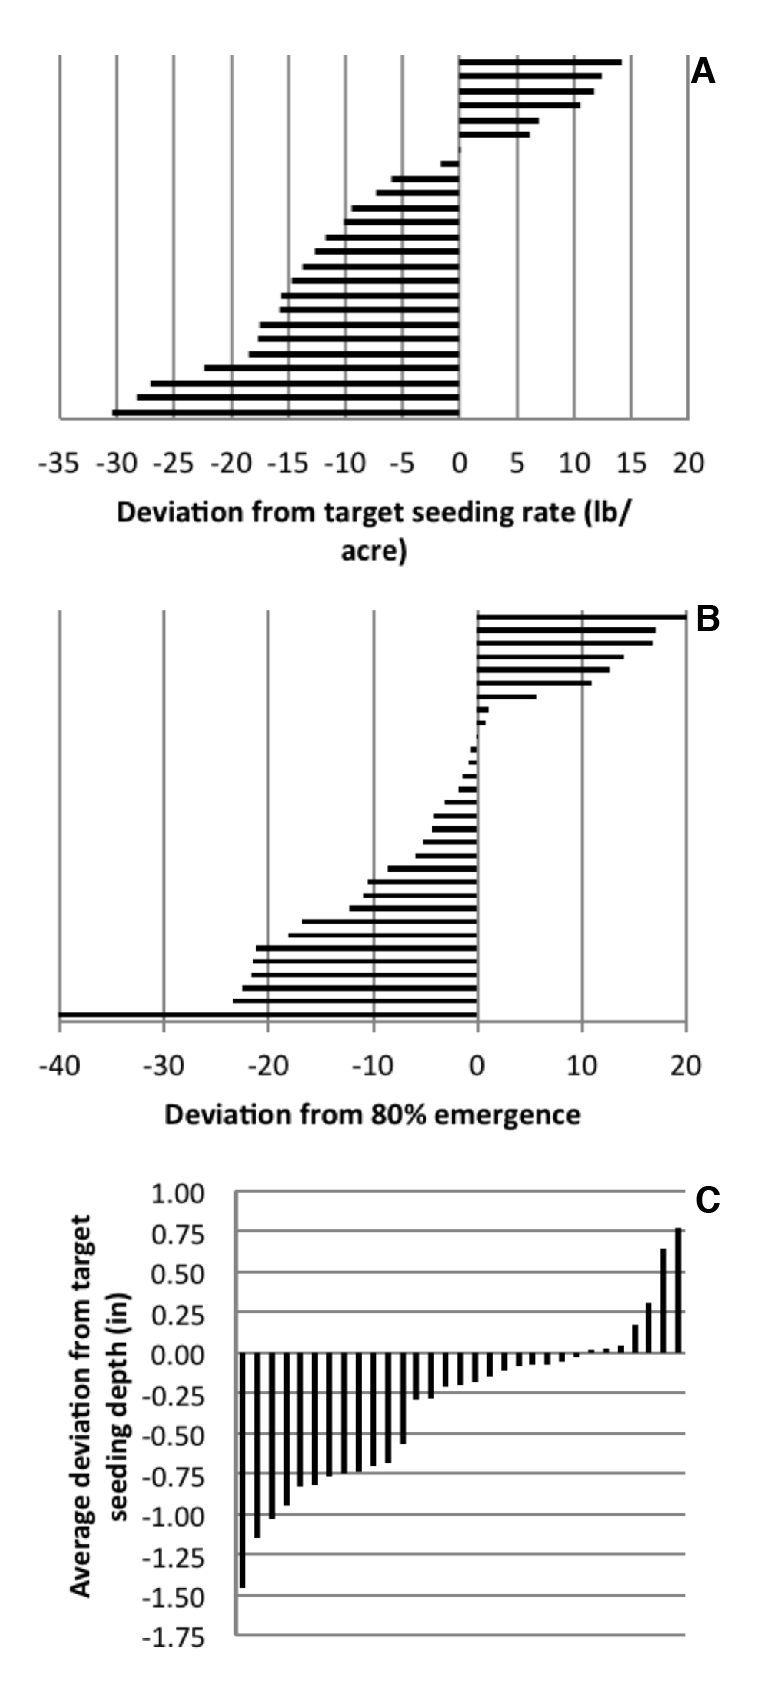 Deviation from target seeding rate, deviation from 80 percent emergence, and average deviation from target seeding depth from on-farm evaluations during the 2009 and 2010 wheat planting seasons.